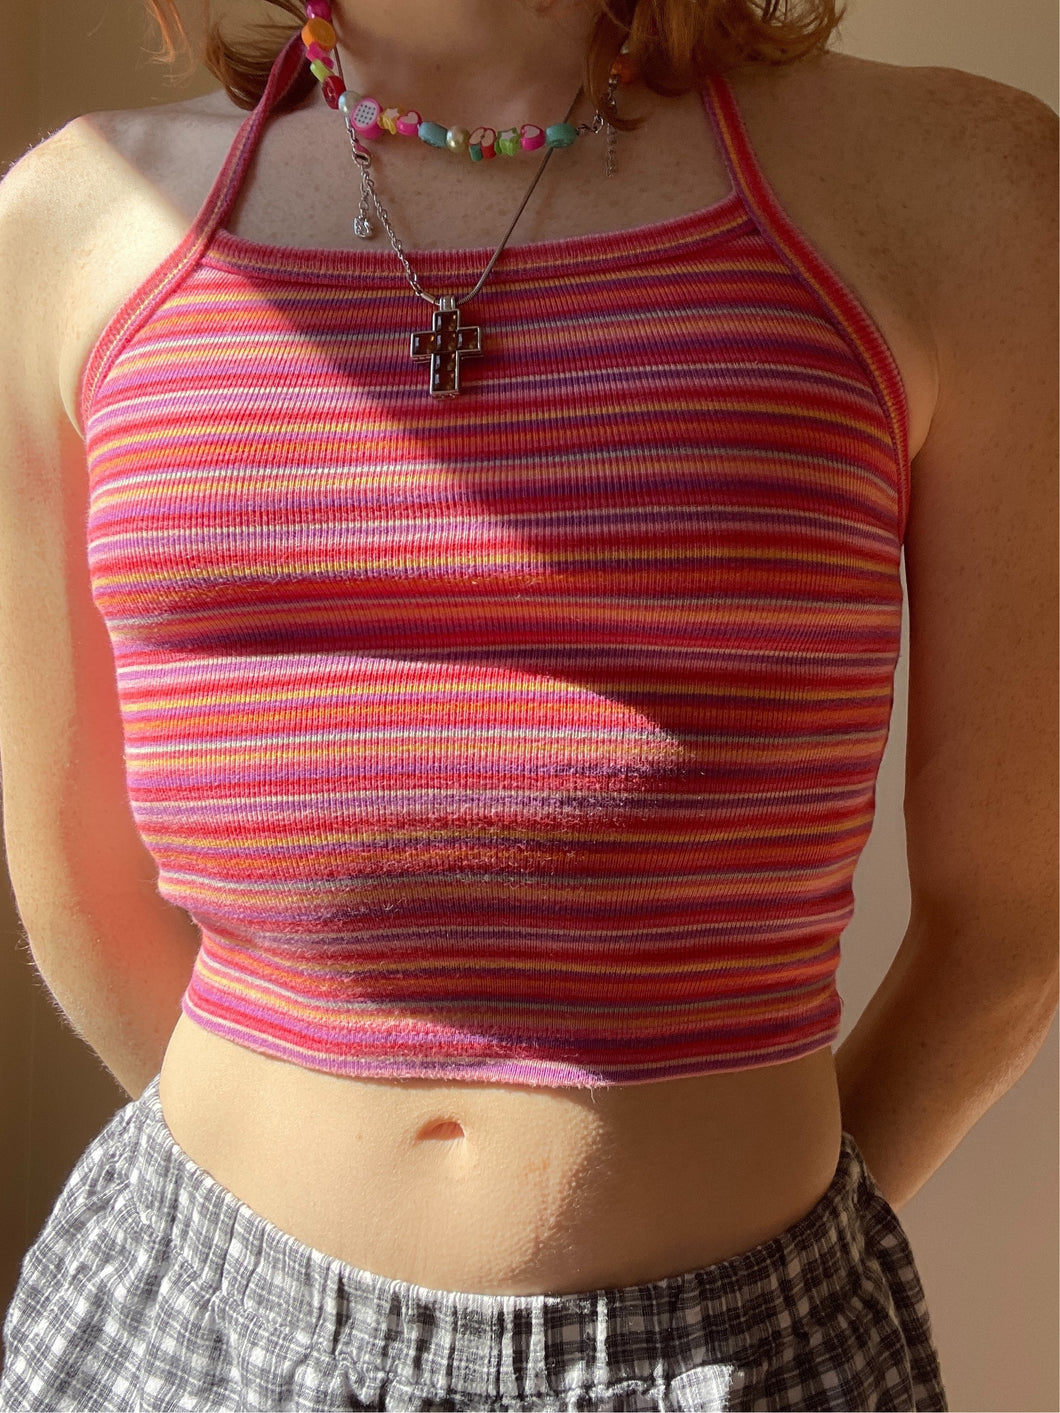 Thrifted striped halter top